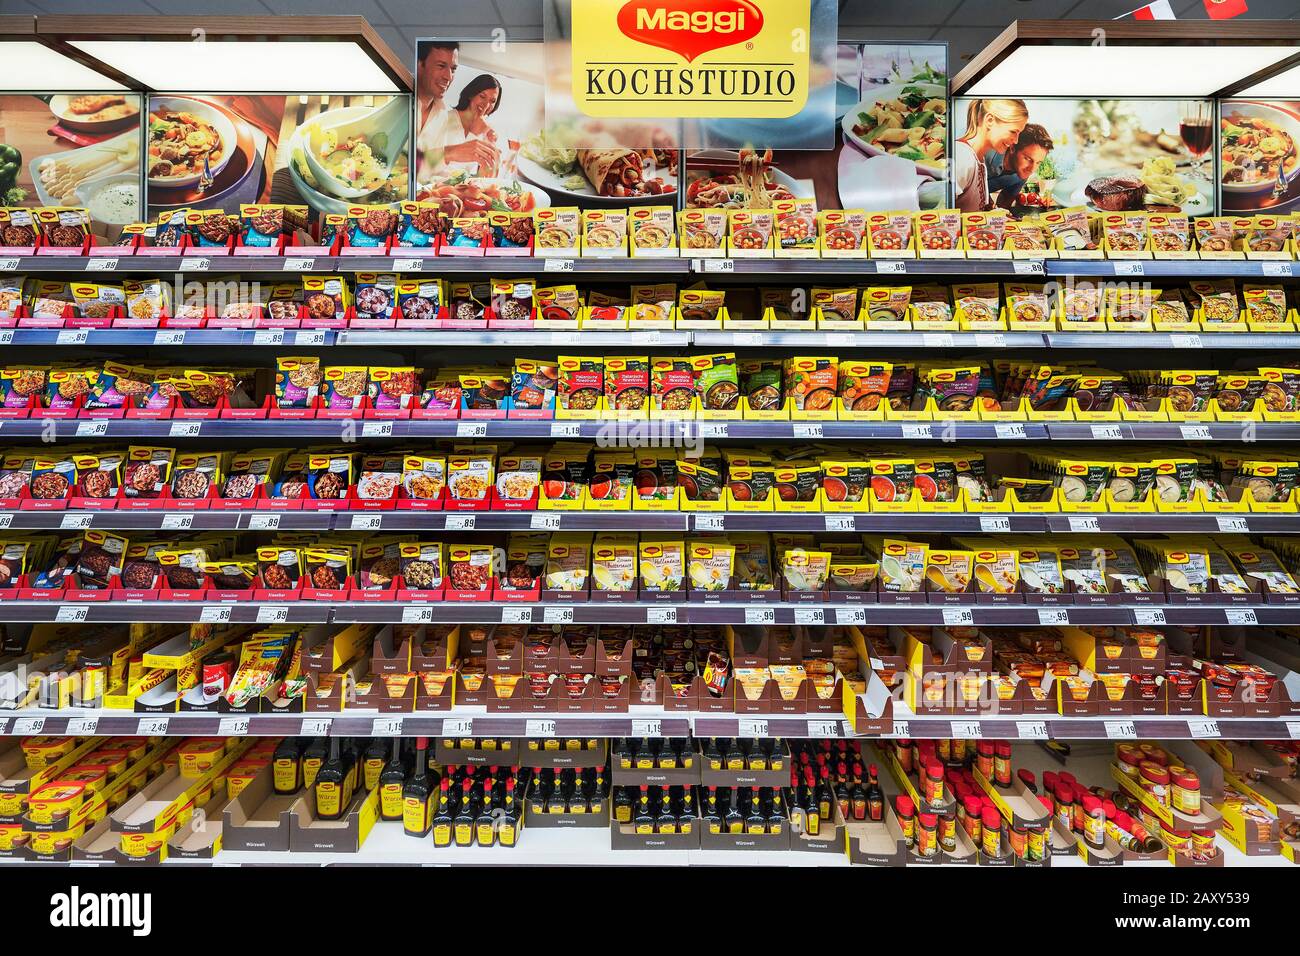 Shelf with packet soups, packet sauces and seasoning sauces, supermarket, Germany Stock Photo